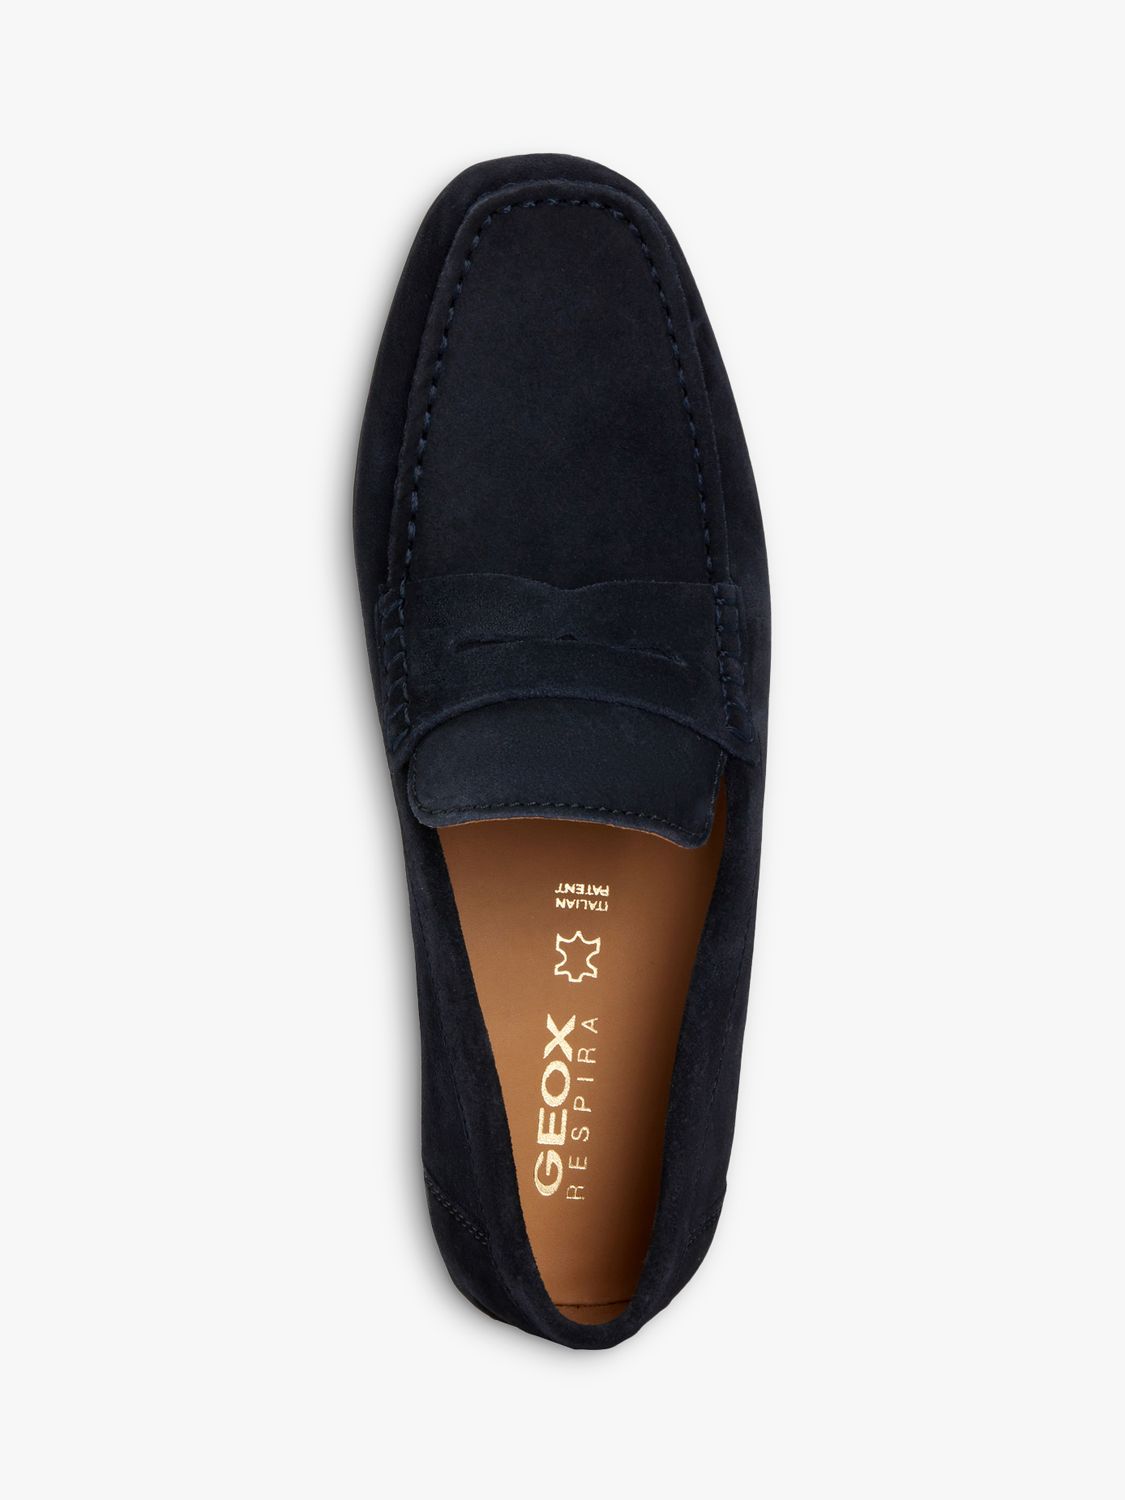 Geox Kosmopolis + Grip Suede Leather Loafers at John Lewis & Partners